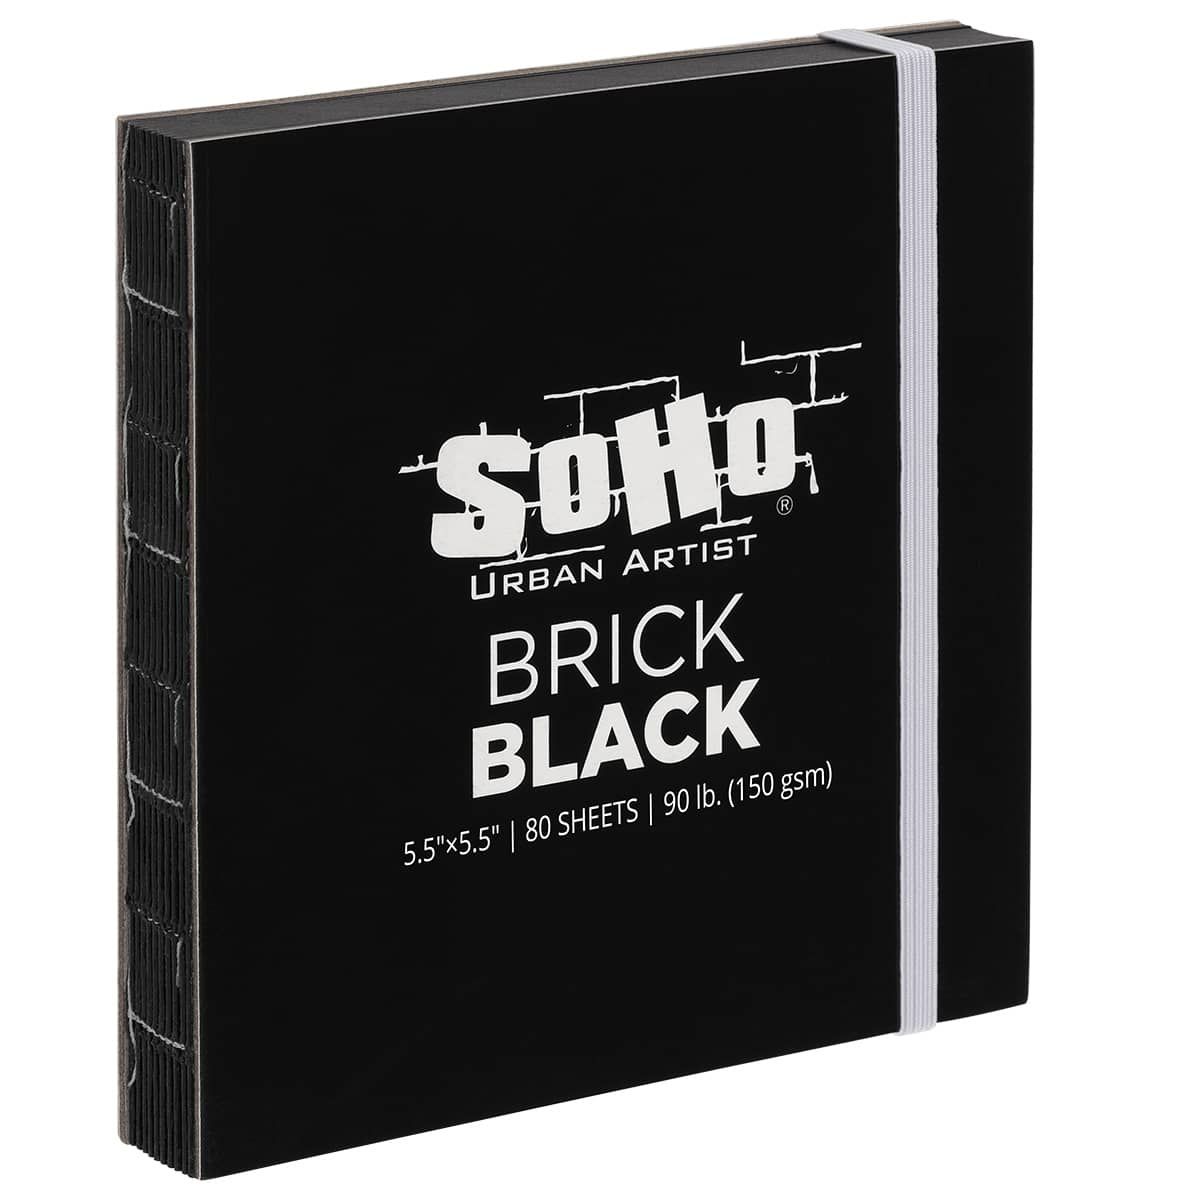 Soho Urban Artist Brick Sketchbook Journals for Sketching, Drawing, Colored Pencils, Graphite, and More - Black 5.5 inchx5.5 inch (150 gsm, 80 Sheets)